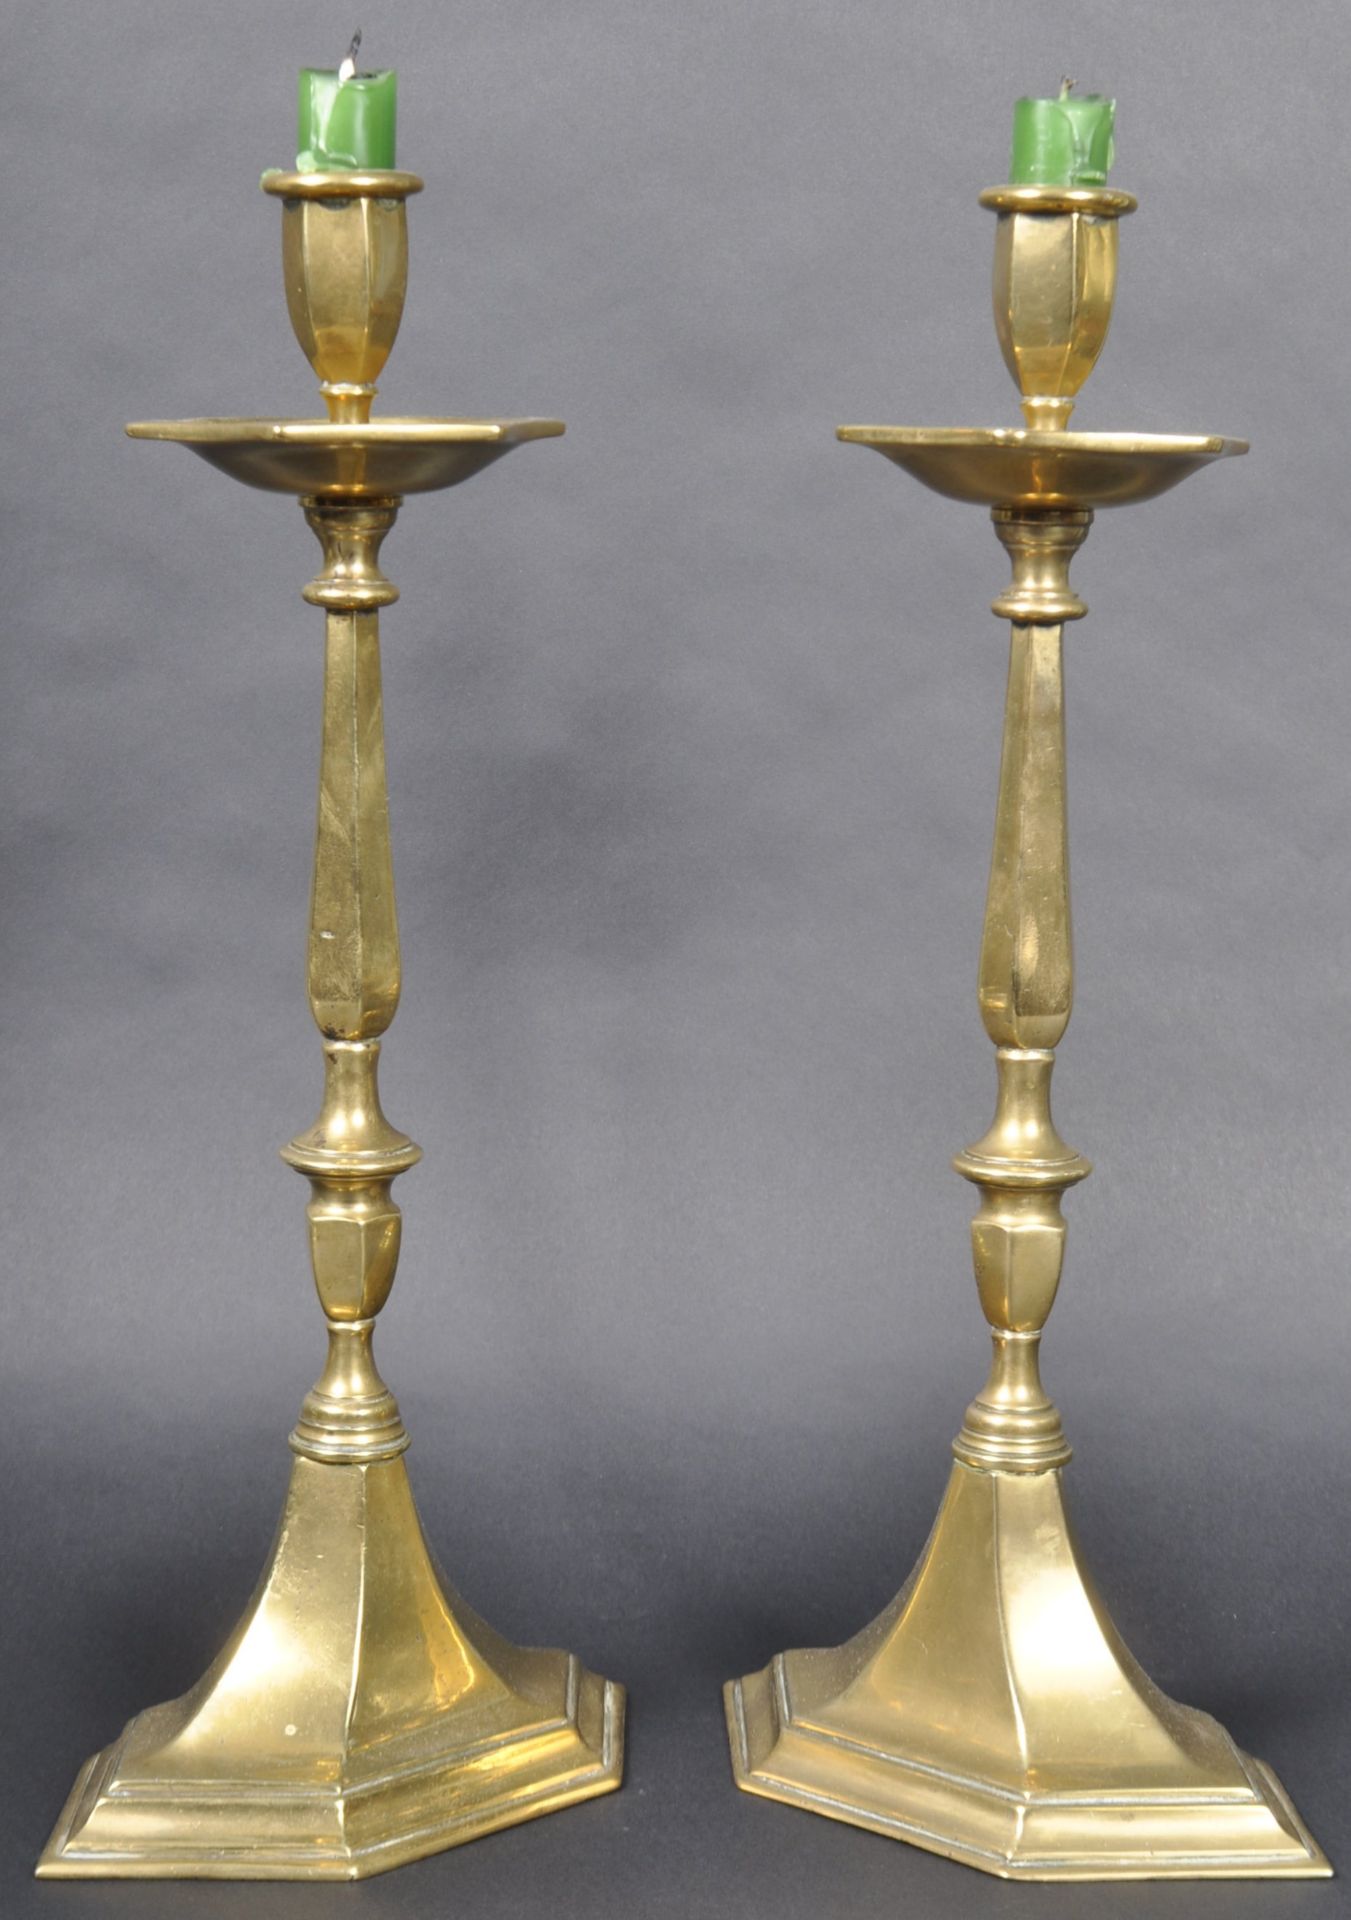 PAIR OF EARLY 20TH CENTURY BRASS CANDLESTICKS